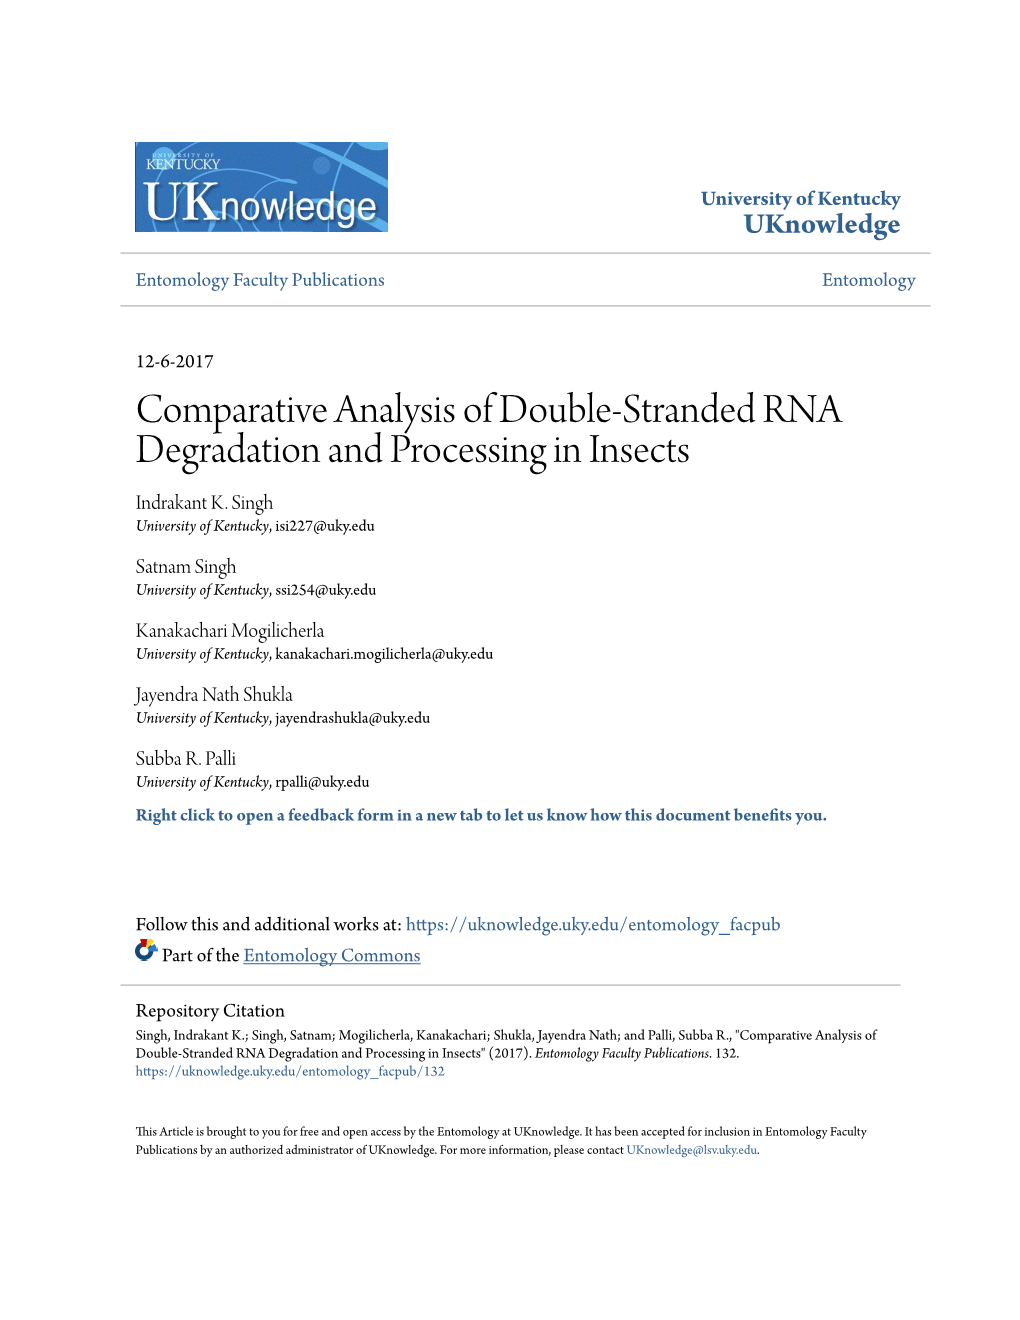 Comparative Analysis of Double-Stranded RNA Degradation and Processing in Insects Indrakant K